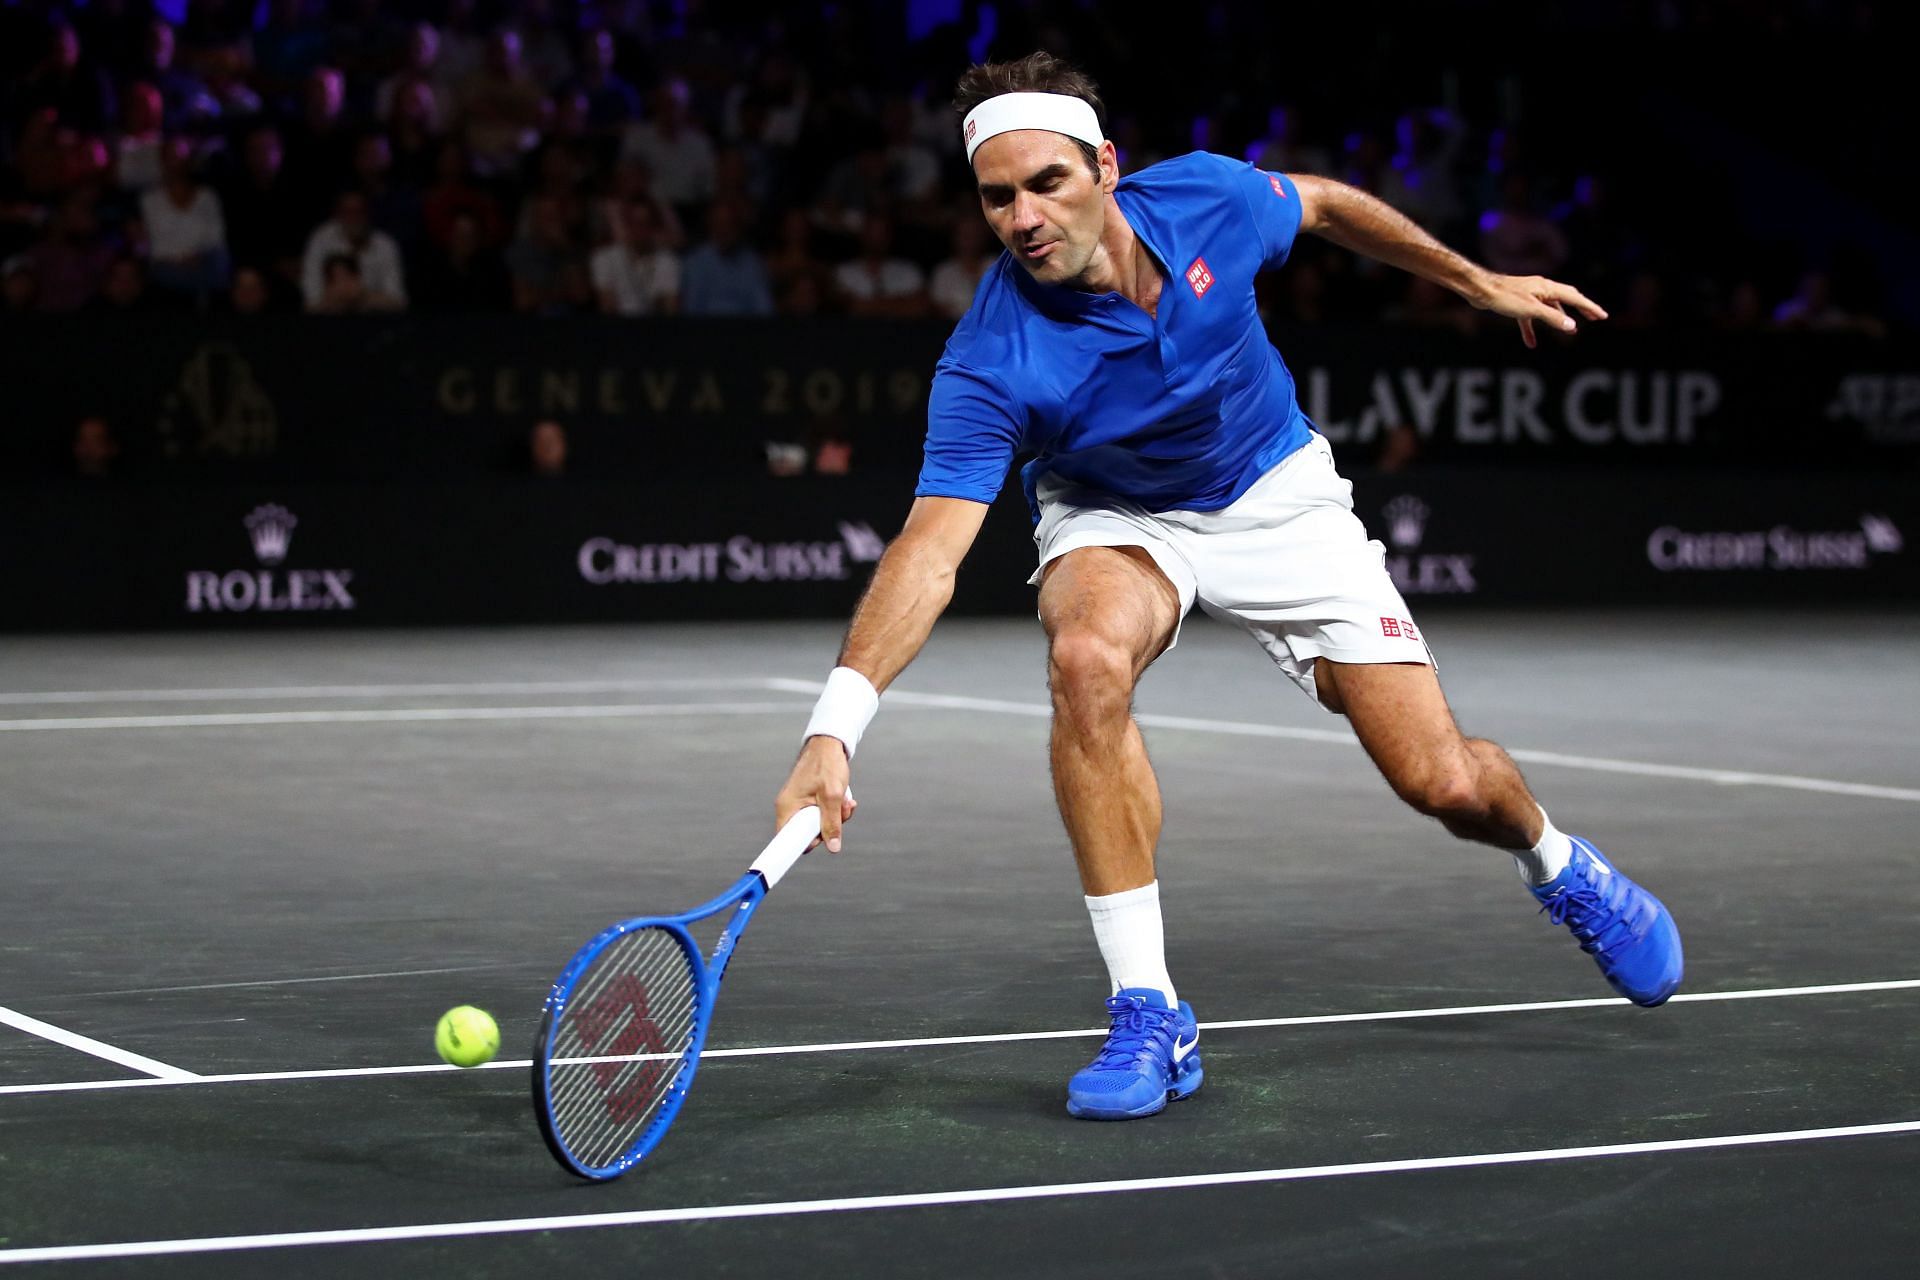 Roger Federer in action at the 2019 Laver Cup.